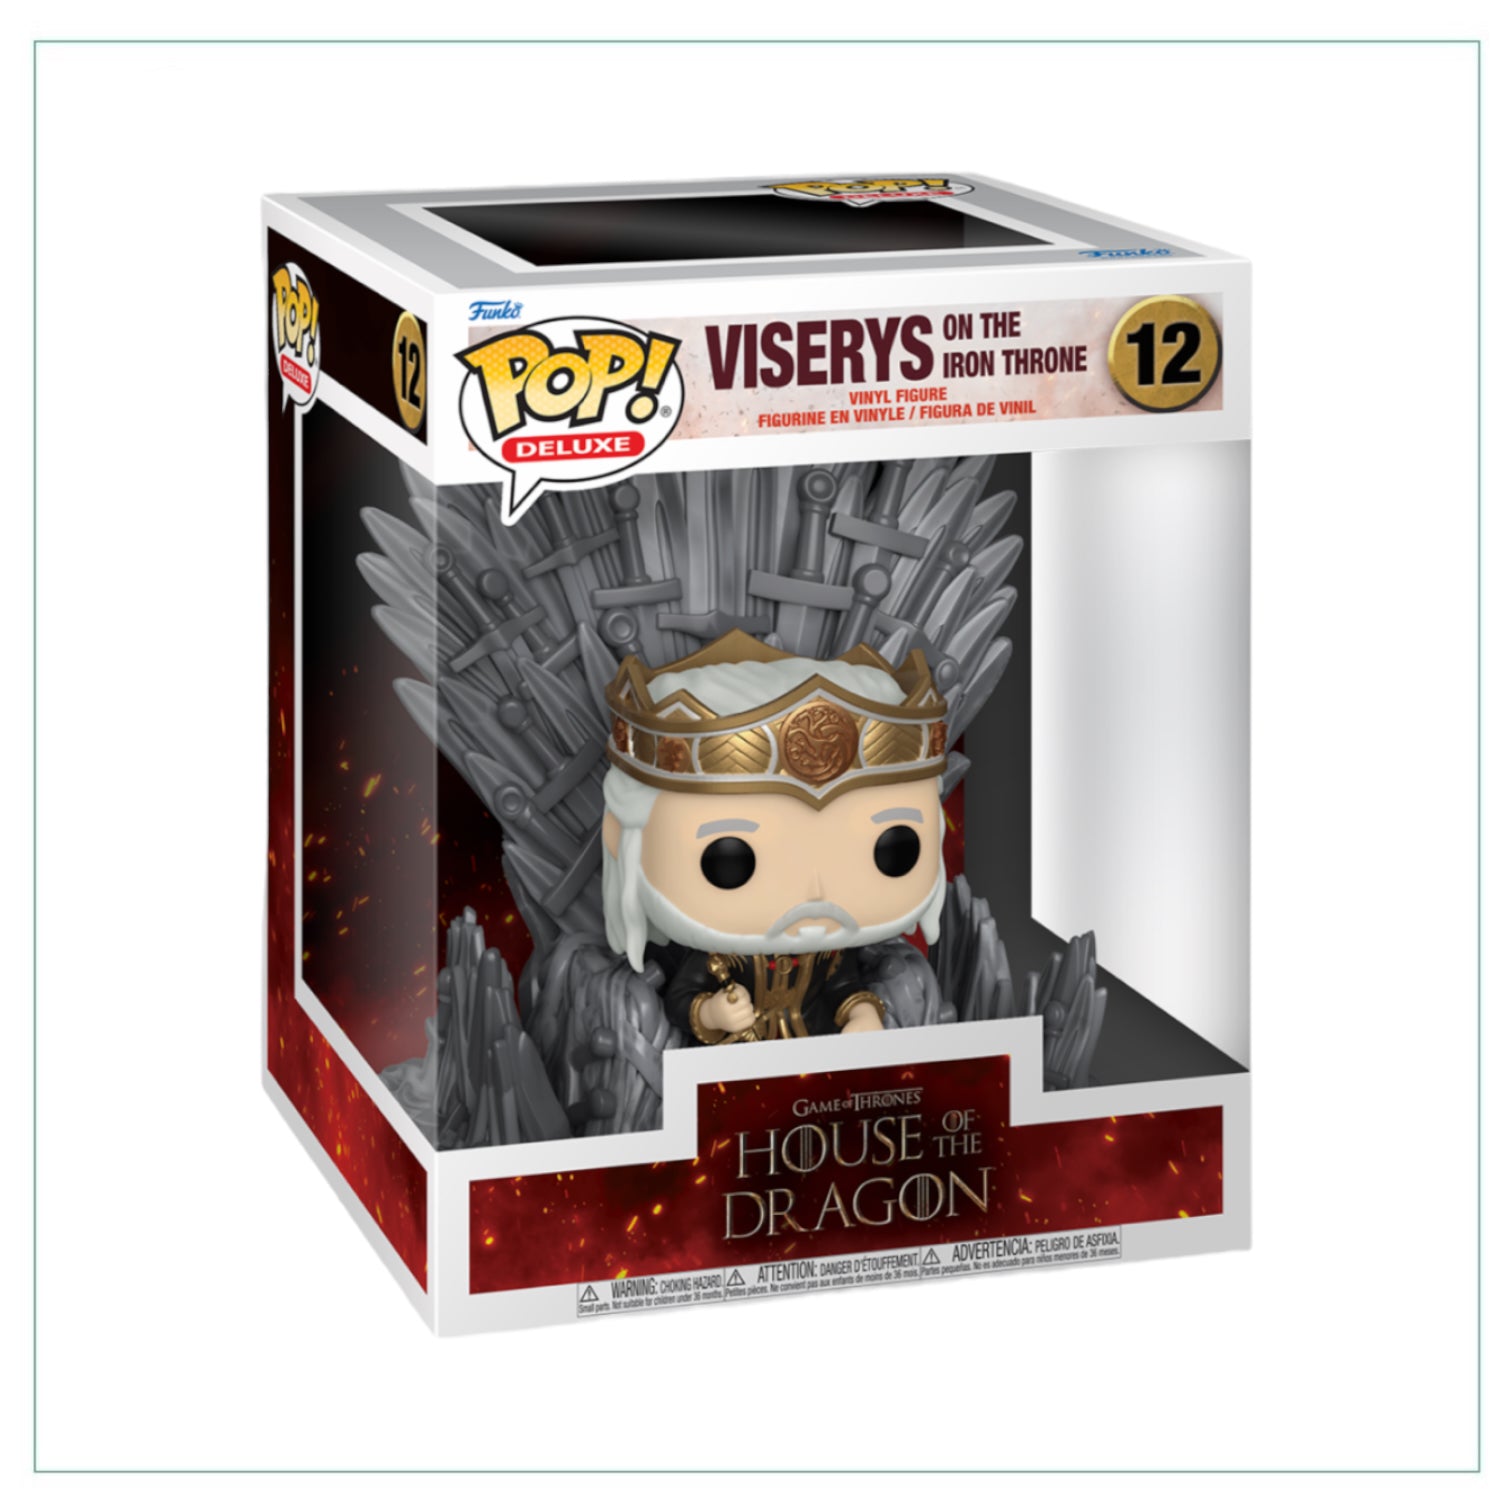 Viserys on the Iron Throne #12 Funko Pop! Deluxe House of The Dragon